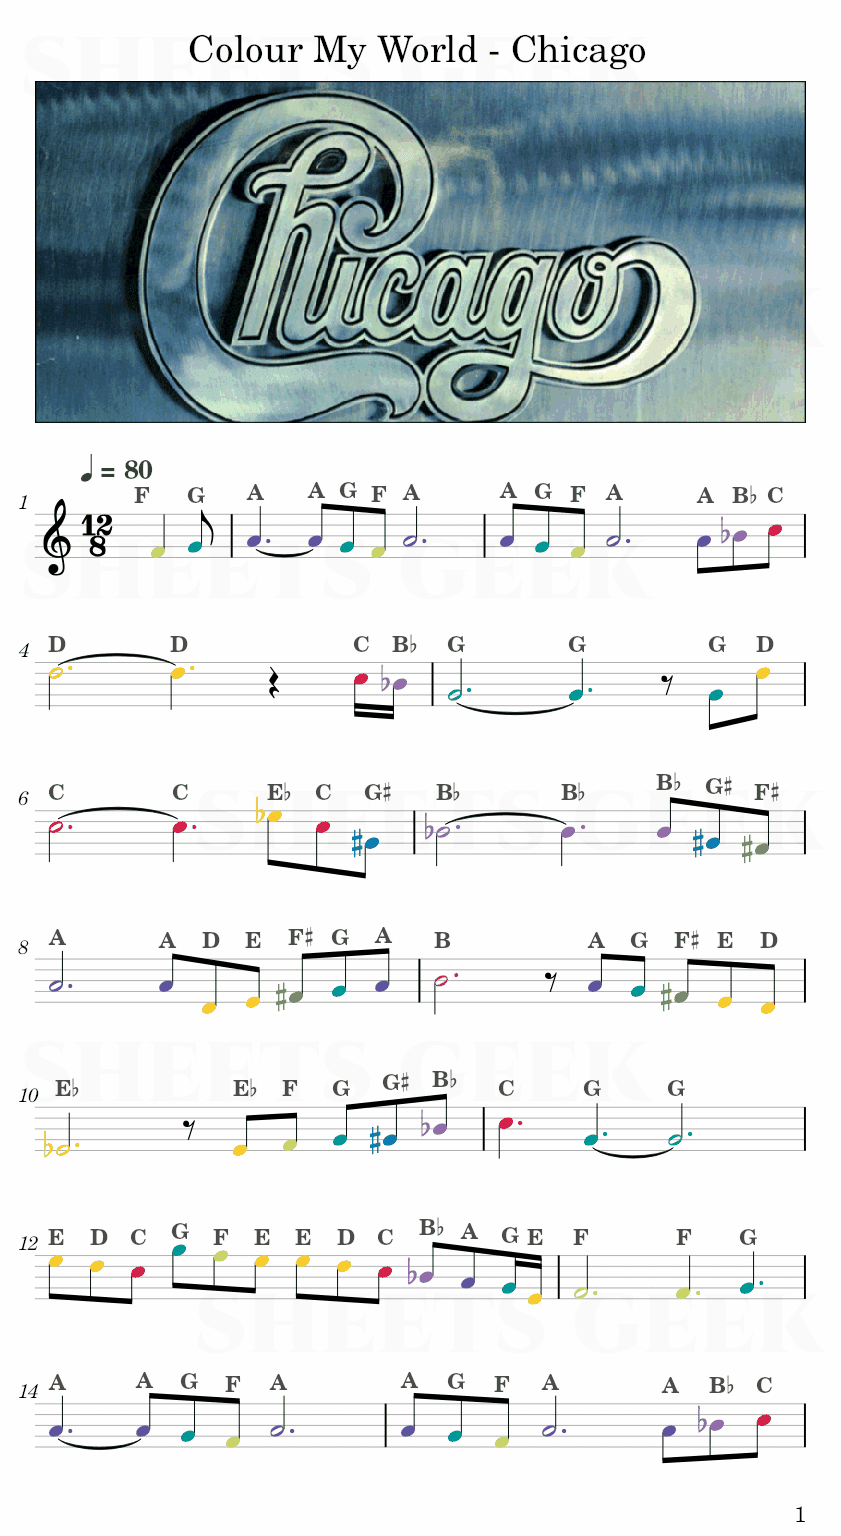 Colour My World - Chicago Easy Sheet Music Free for piano, keyboard, flute, violin, sax, cello page 1